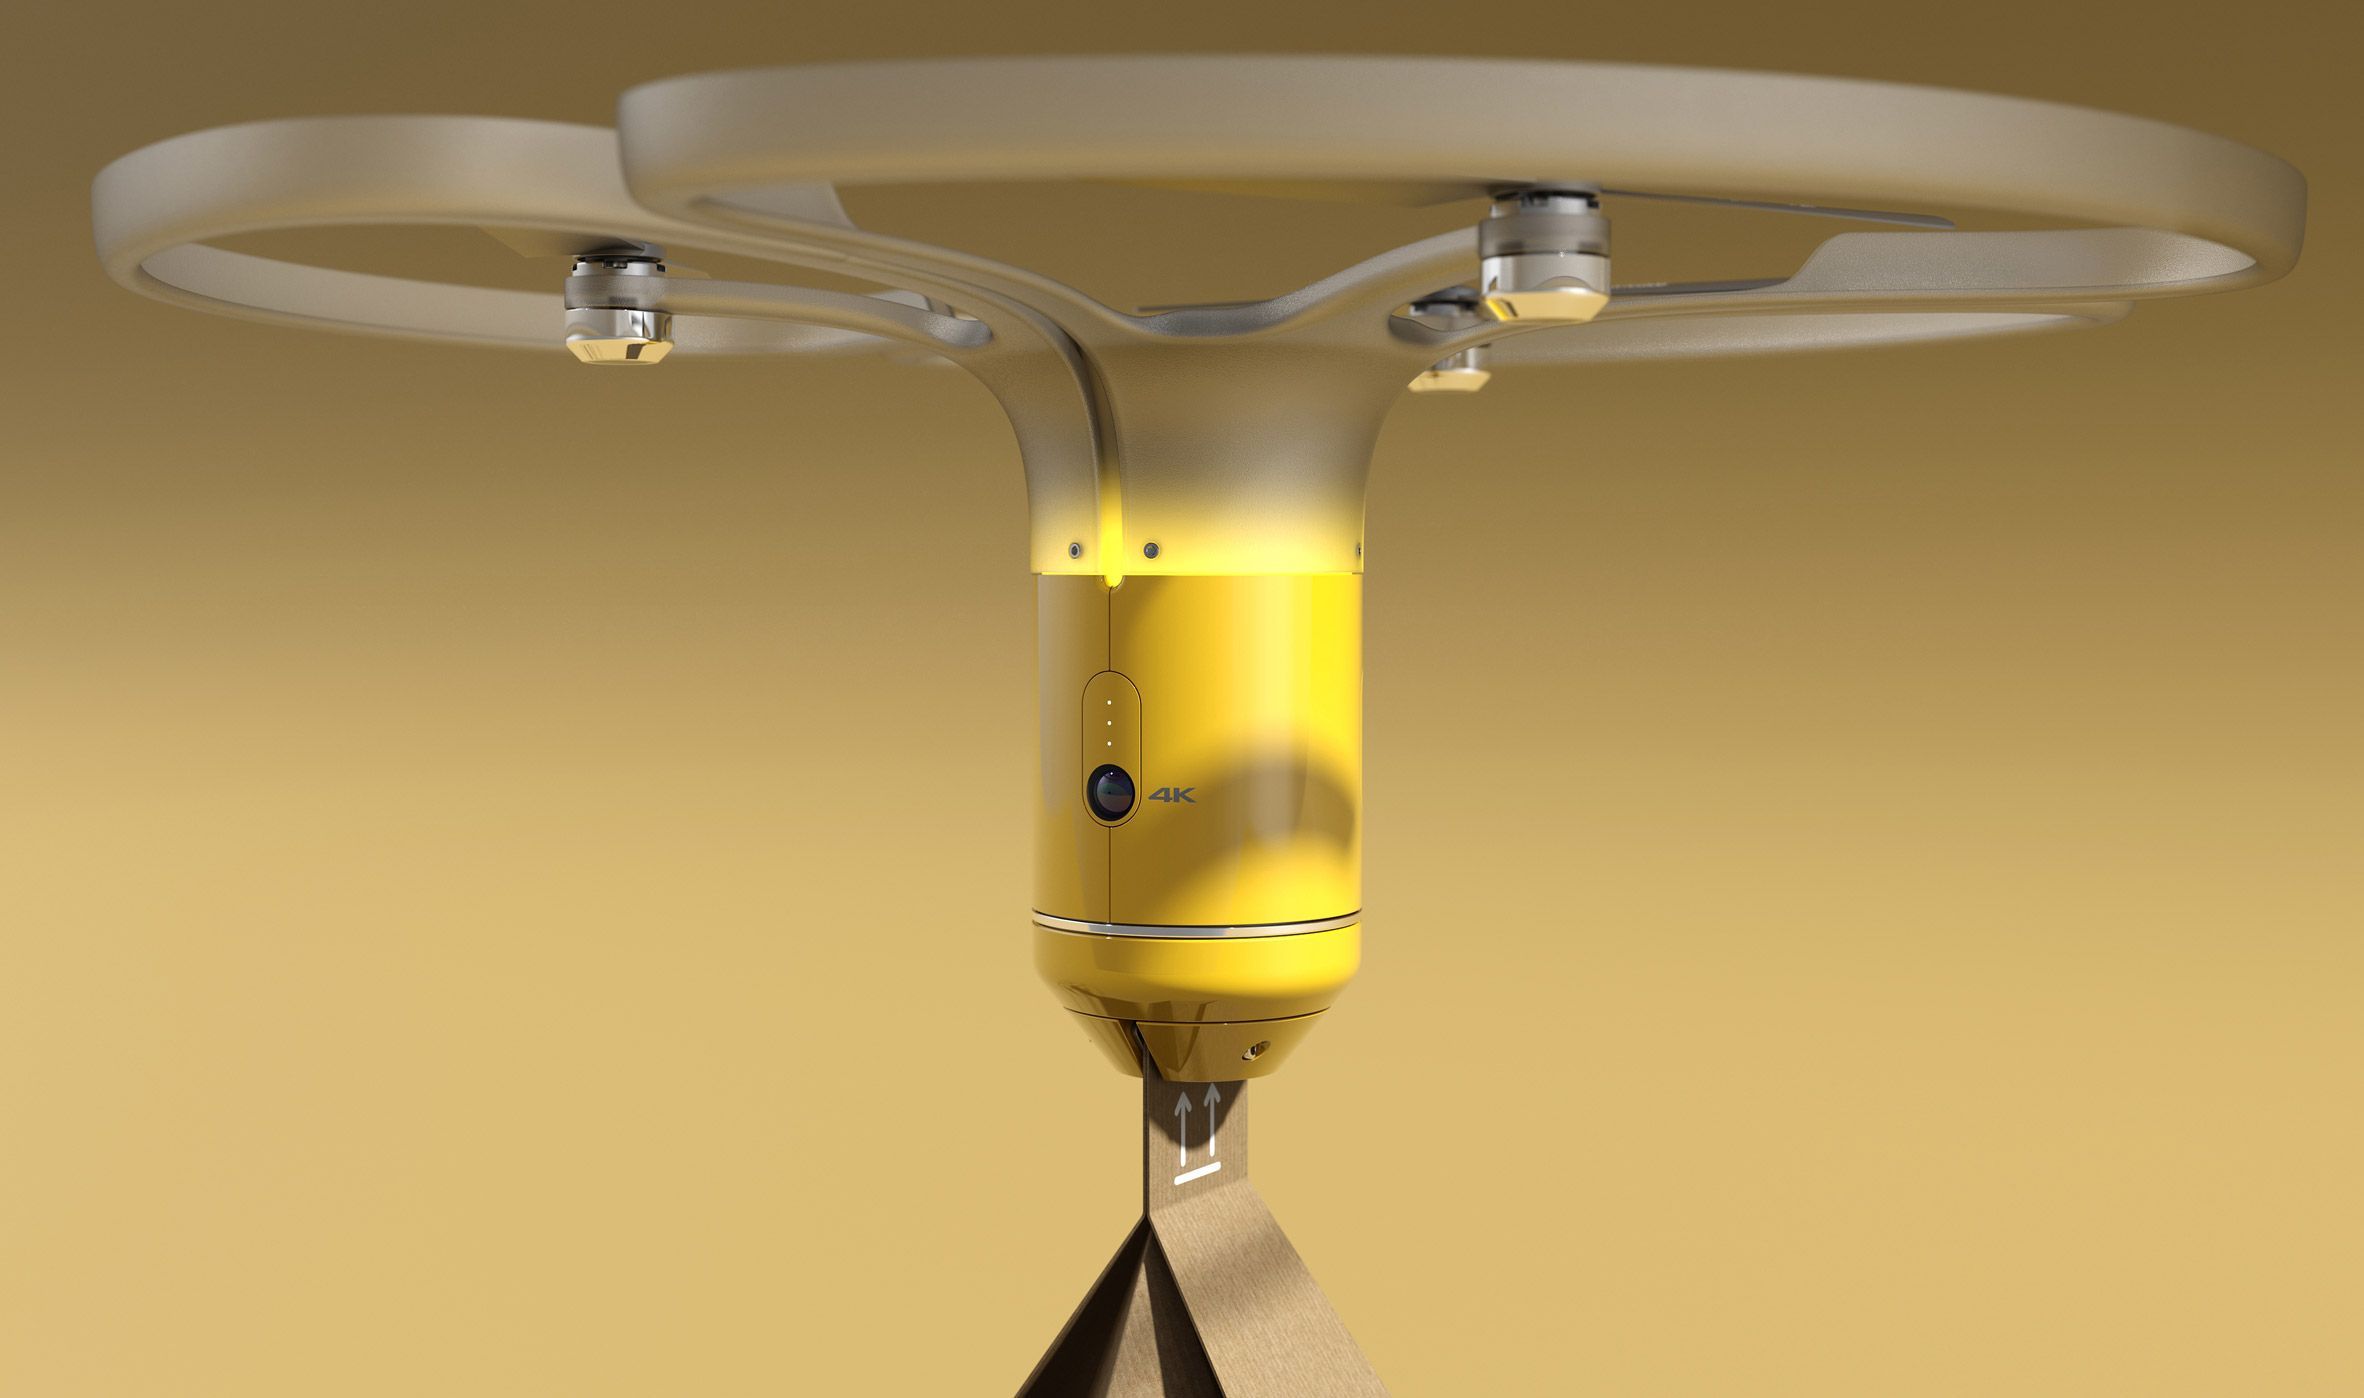 PriestmanGoode unveils concept for city-wide drone delivery system